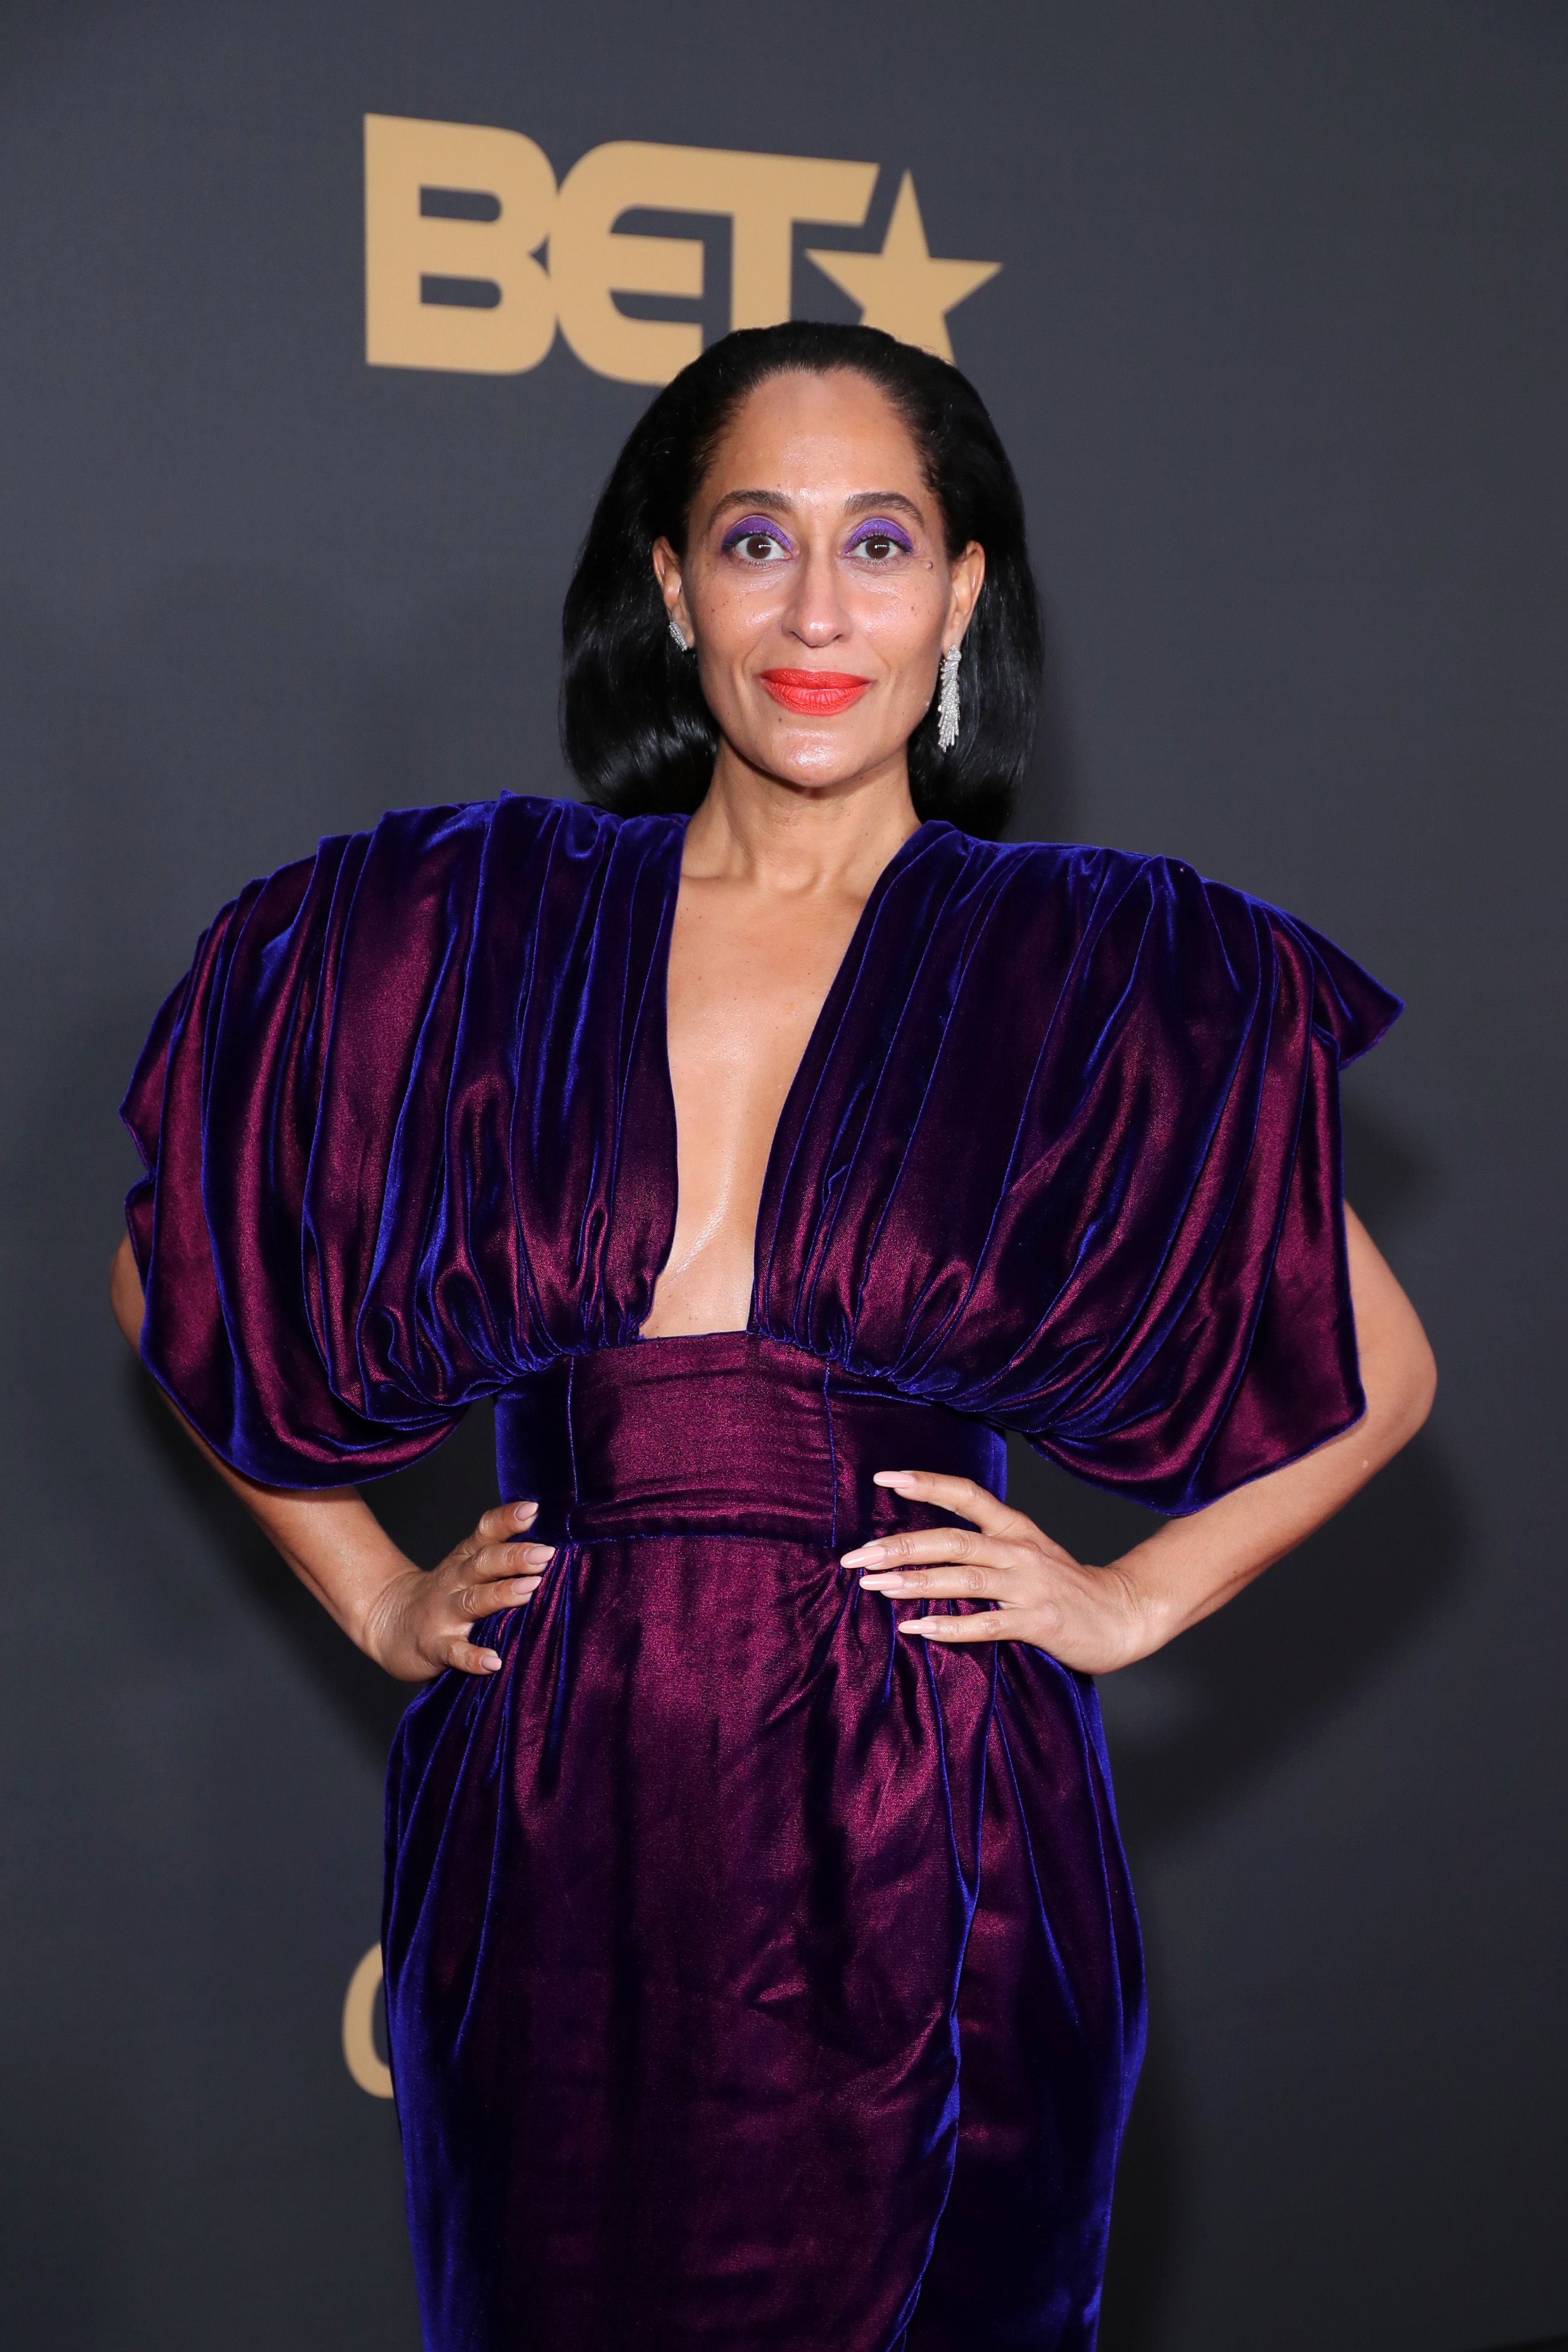 Tracee Ellis Ross at the 51st NAACP Image Awards presented by BET at the Pasadena Civic Auditorium on February 22, 2020 in Pasadena, California | Photo: Getty Images 